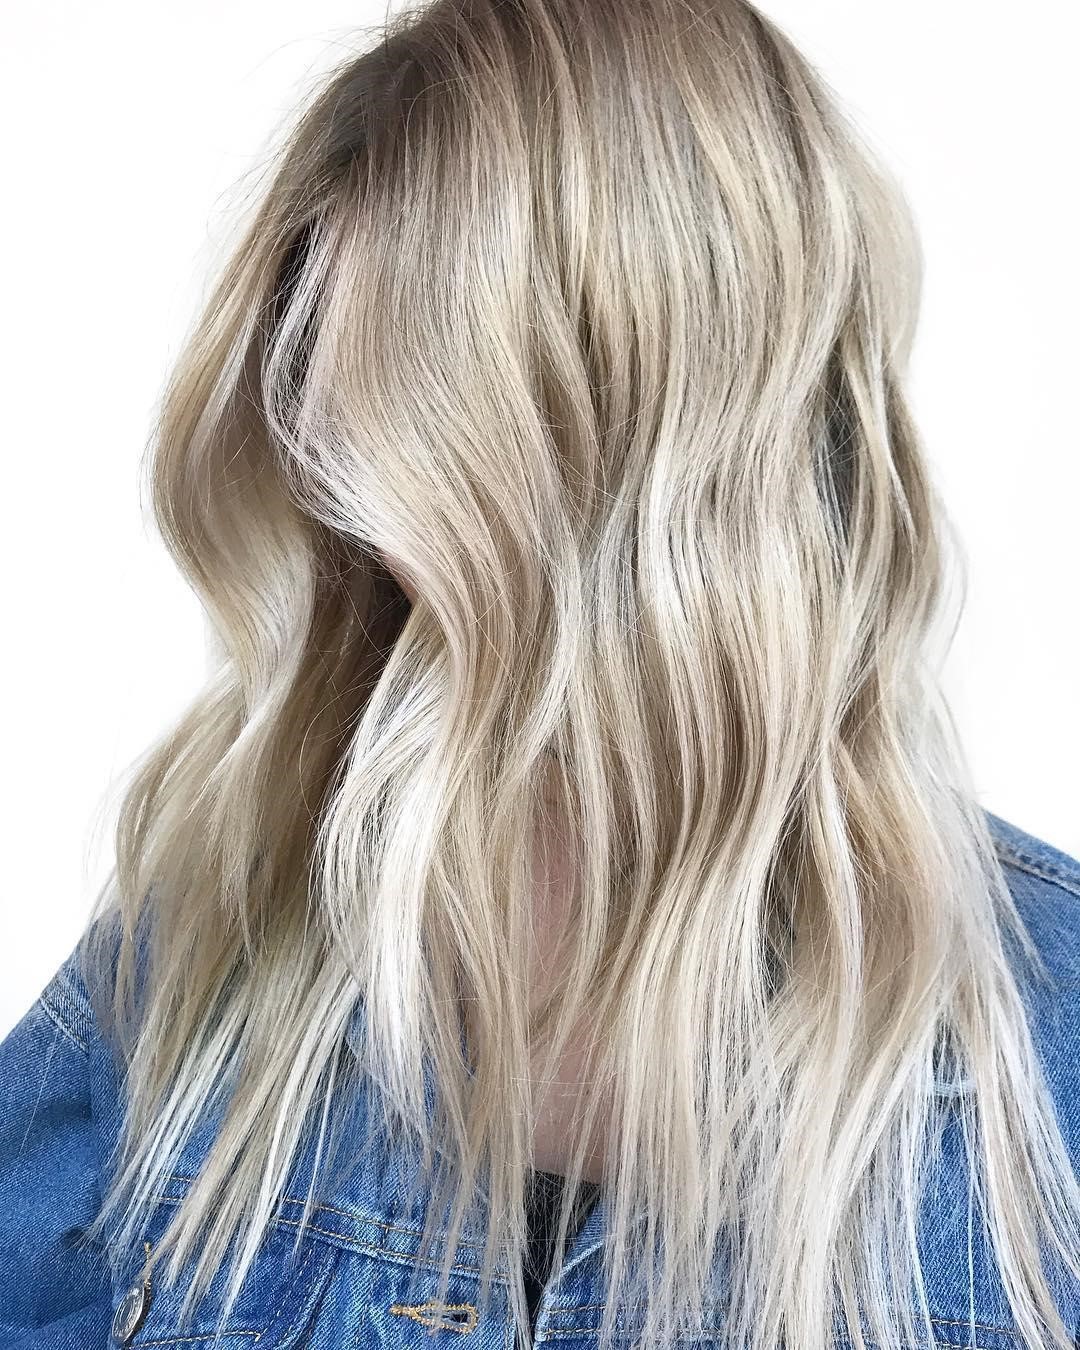 10 Of The Sexiest Shades For Platinum Blonde Hair You Will ...